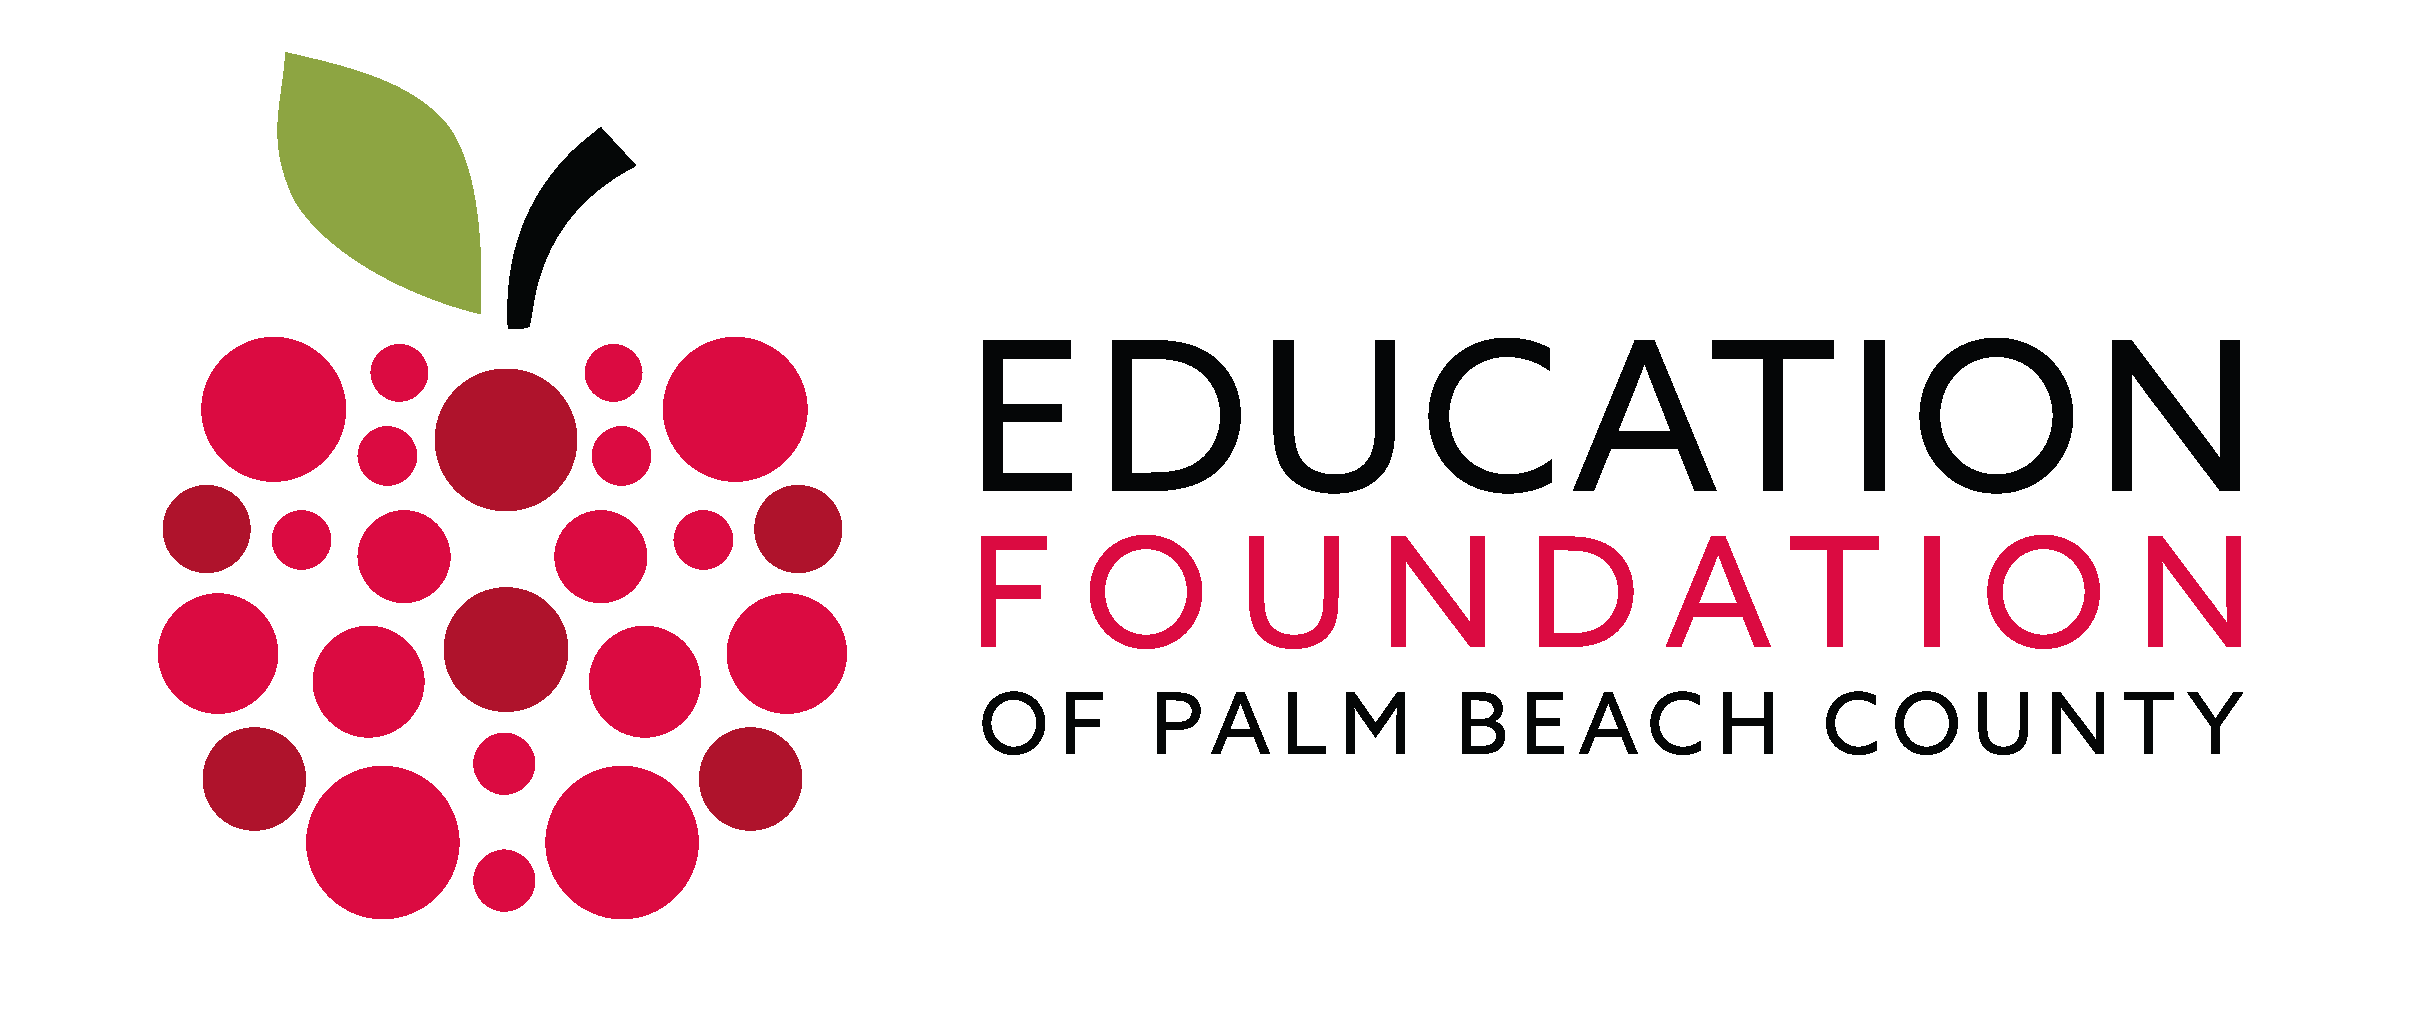 Education Foundation Of Palm Beach County Info